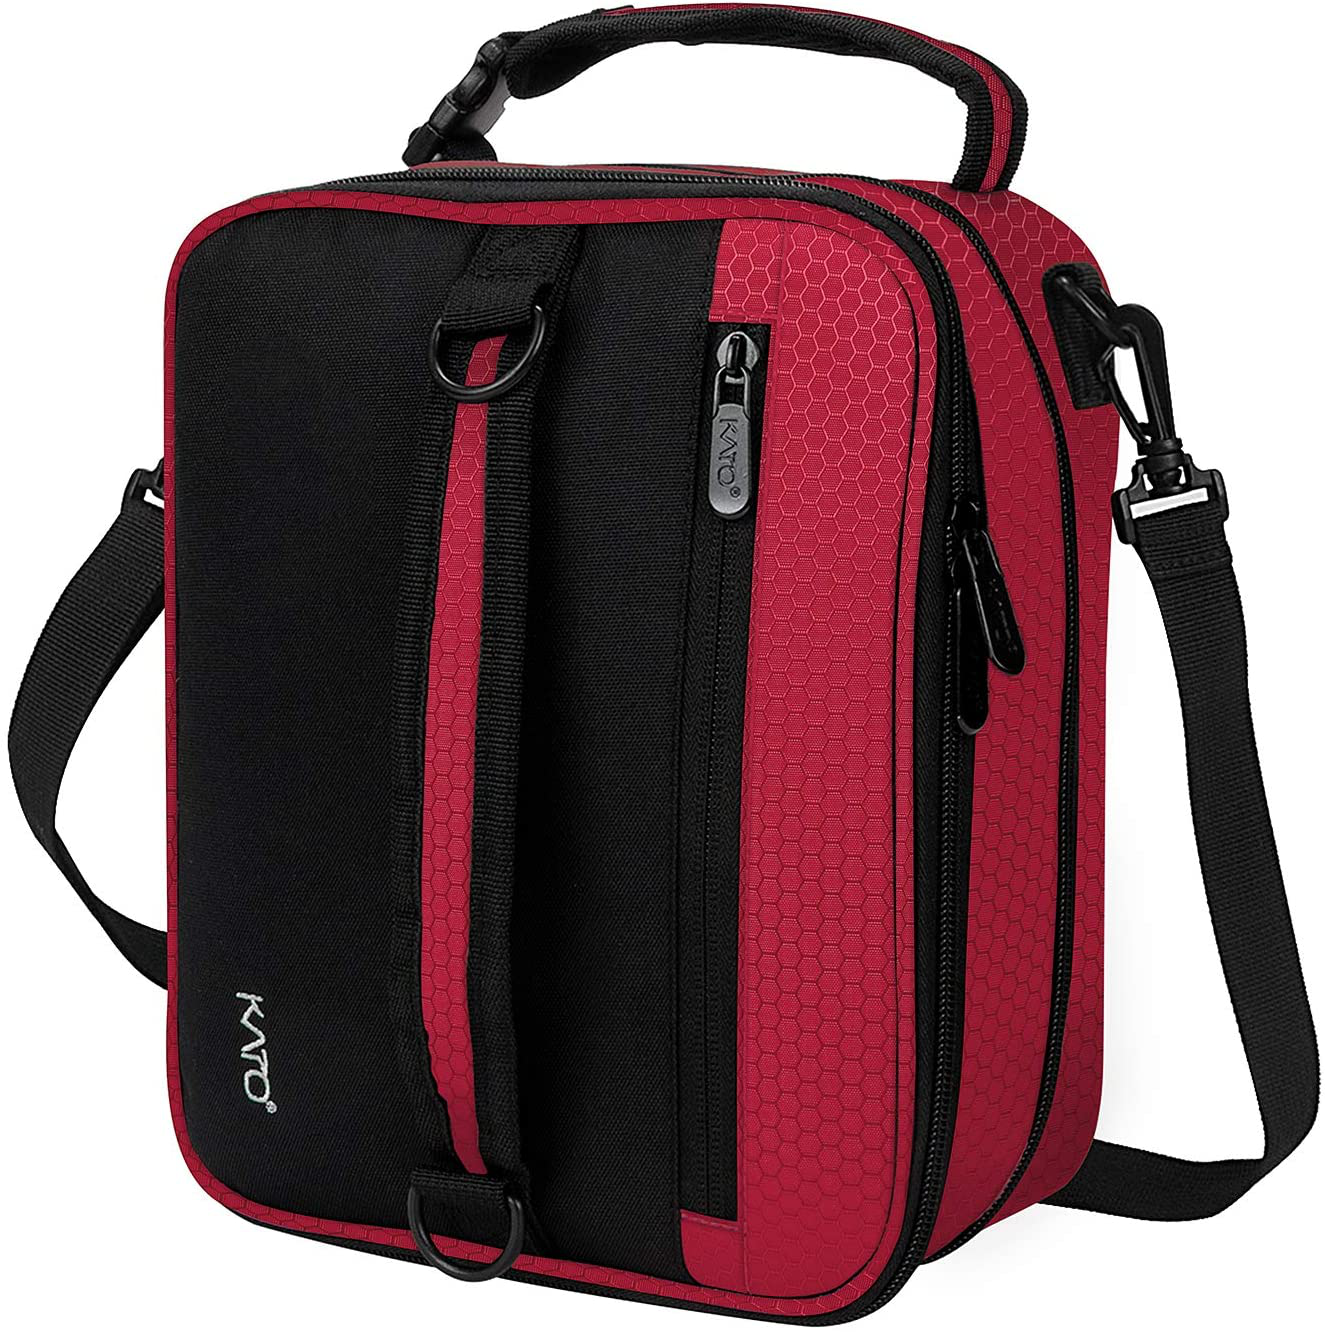 Expandable Insulated Lunch Bag, Leakproof Flat Lunch Cooler Tote with Shoulder Strap for Men and Women, Suitable for Work & Office, Red